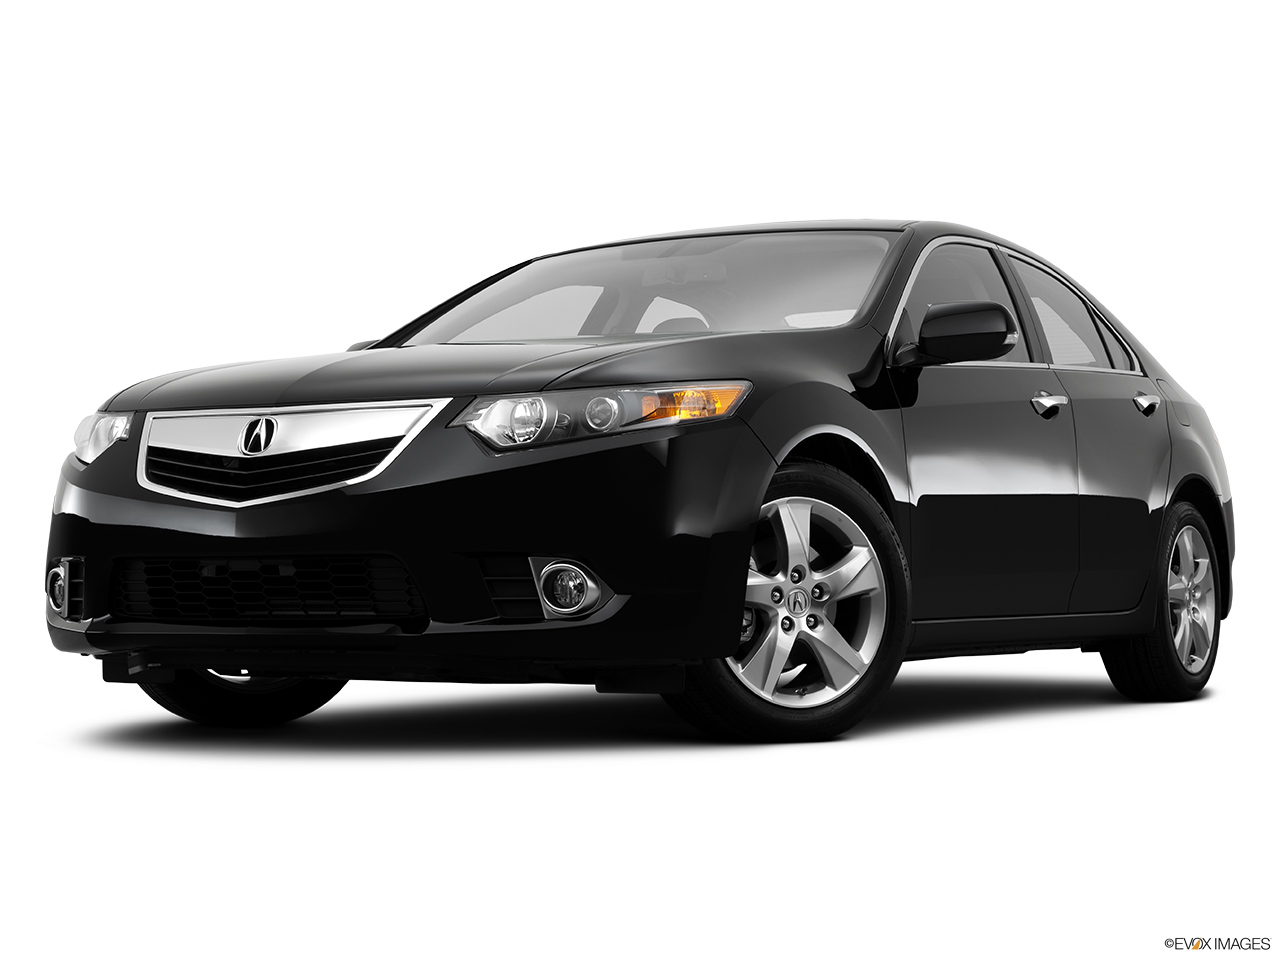 2014 Acura TSX 5-speed Automatic Front angle view, low wide perspective. 